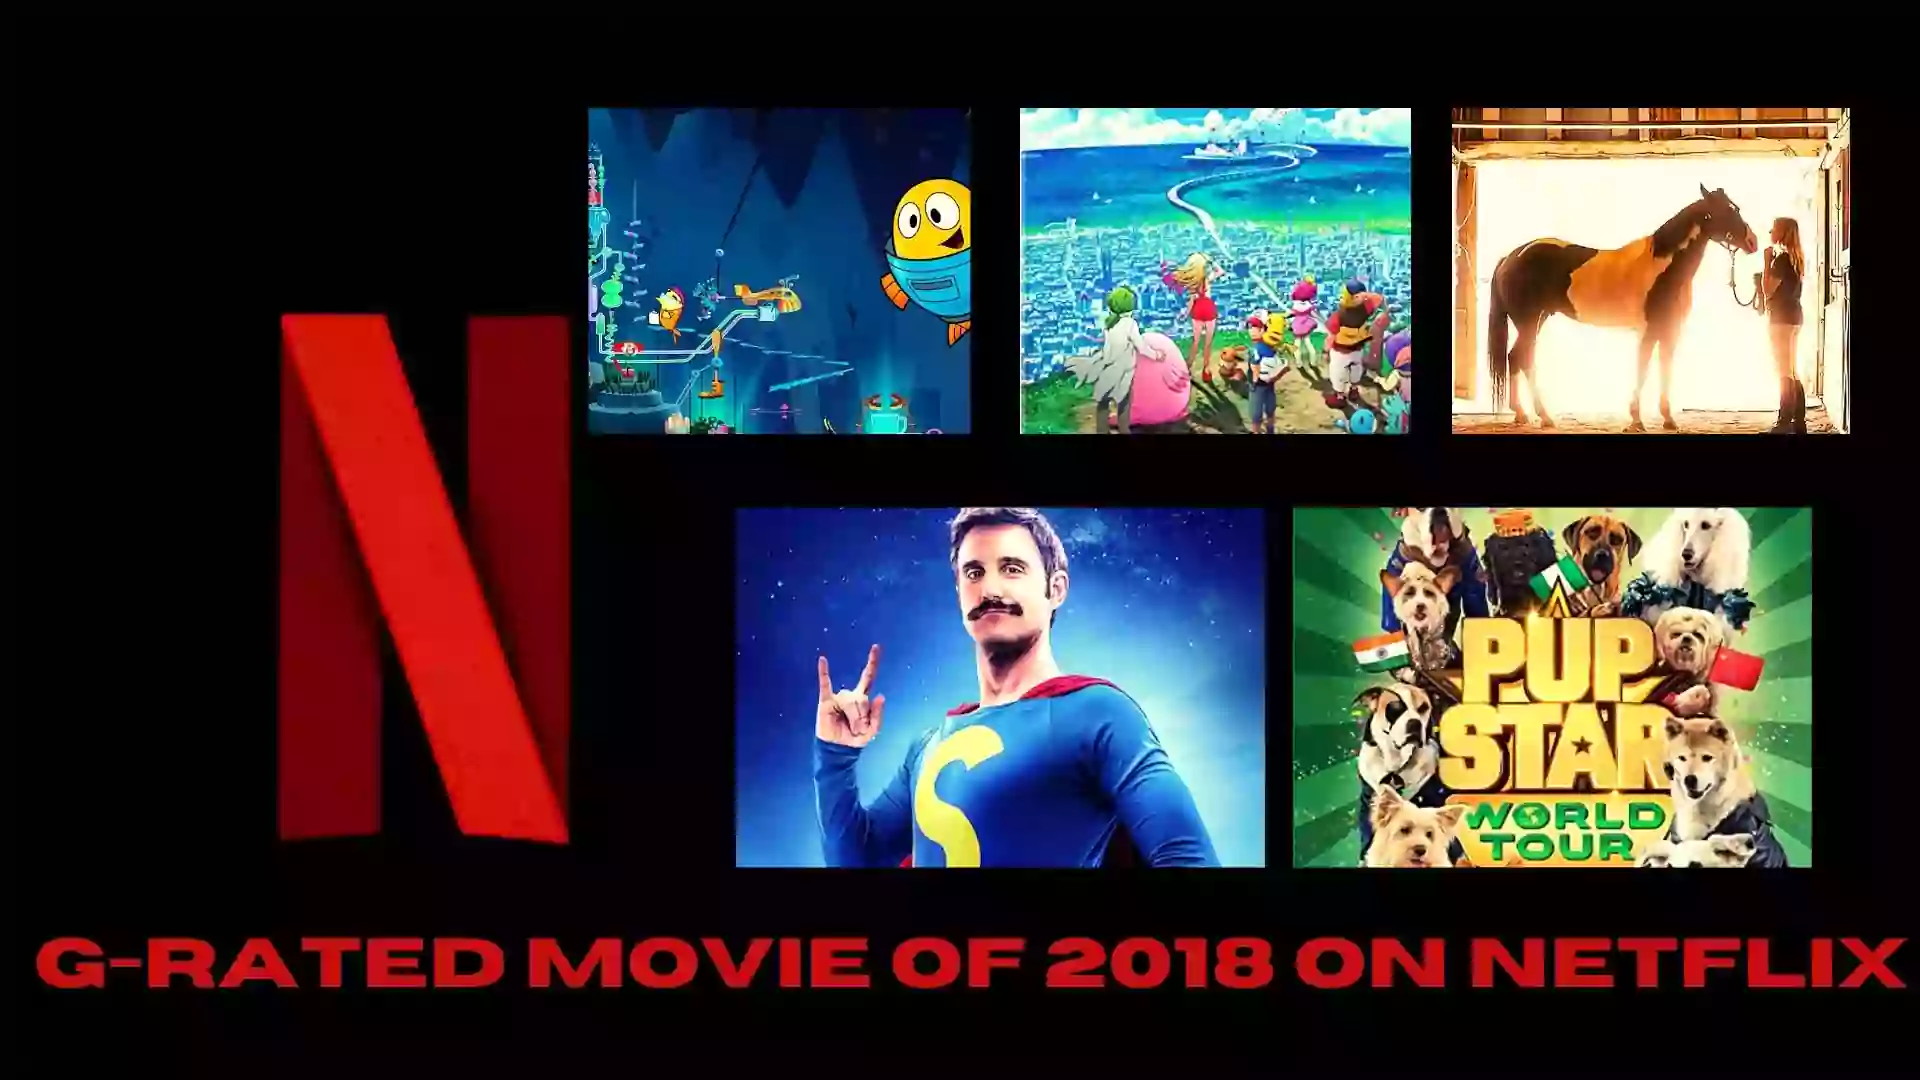 G-Rated Movie of 2018 on Netflix